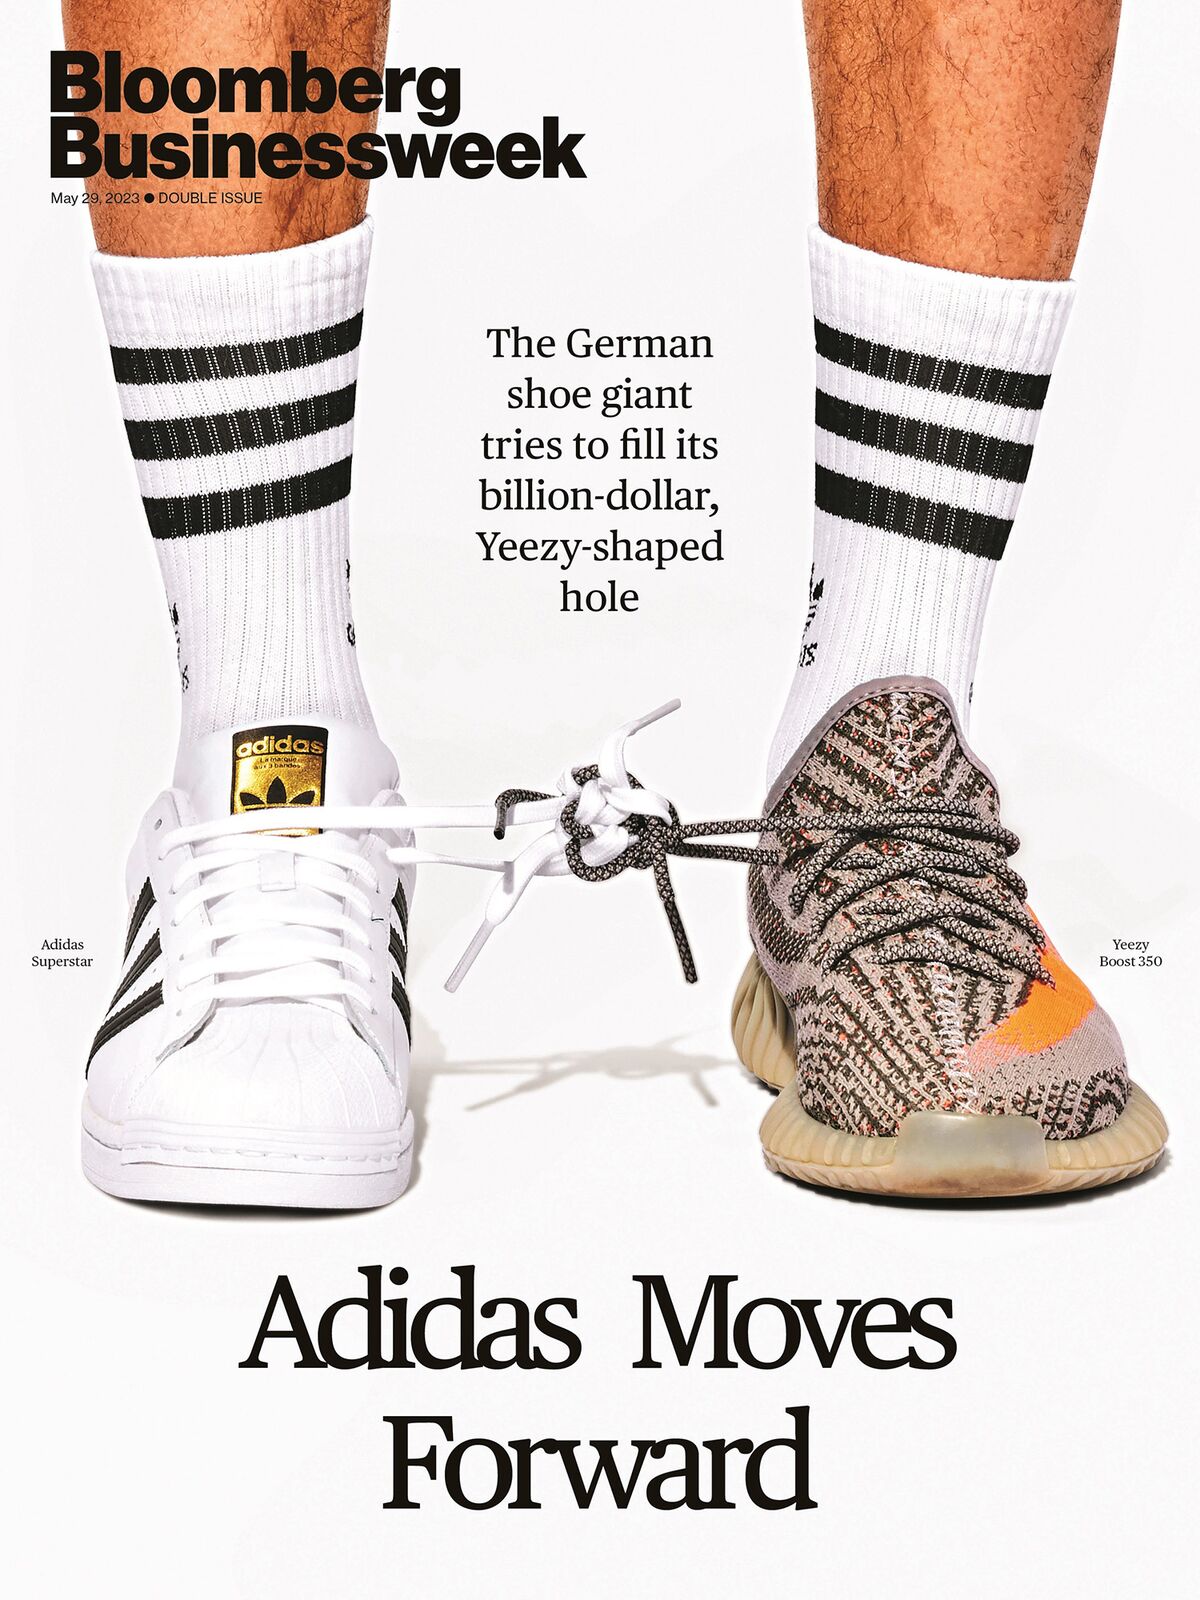 Adidas's Mess Has Been Billion-Dollar Nightmare for Business - Bloomberg